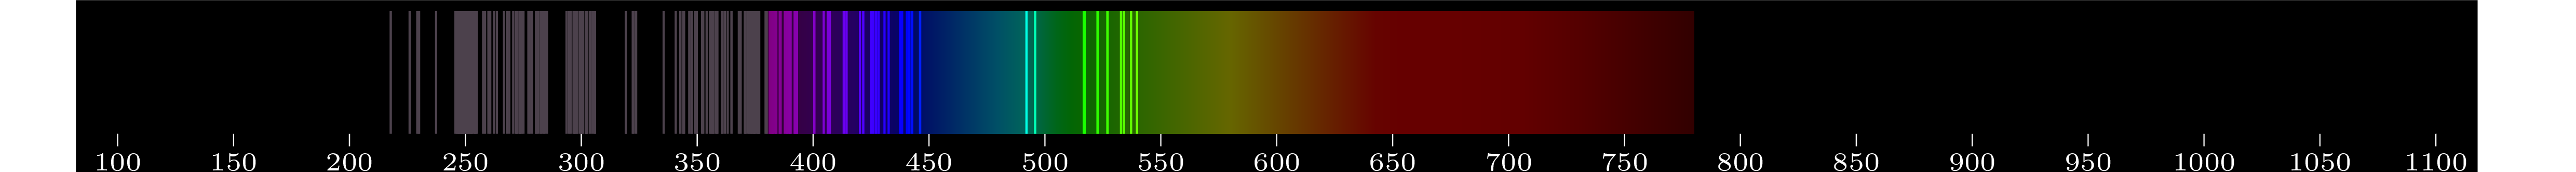 emmision spectra of element Fe